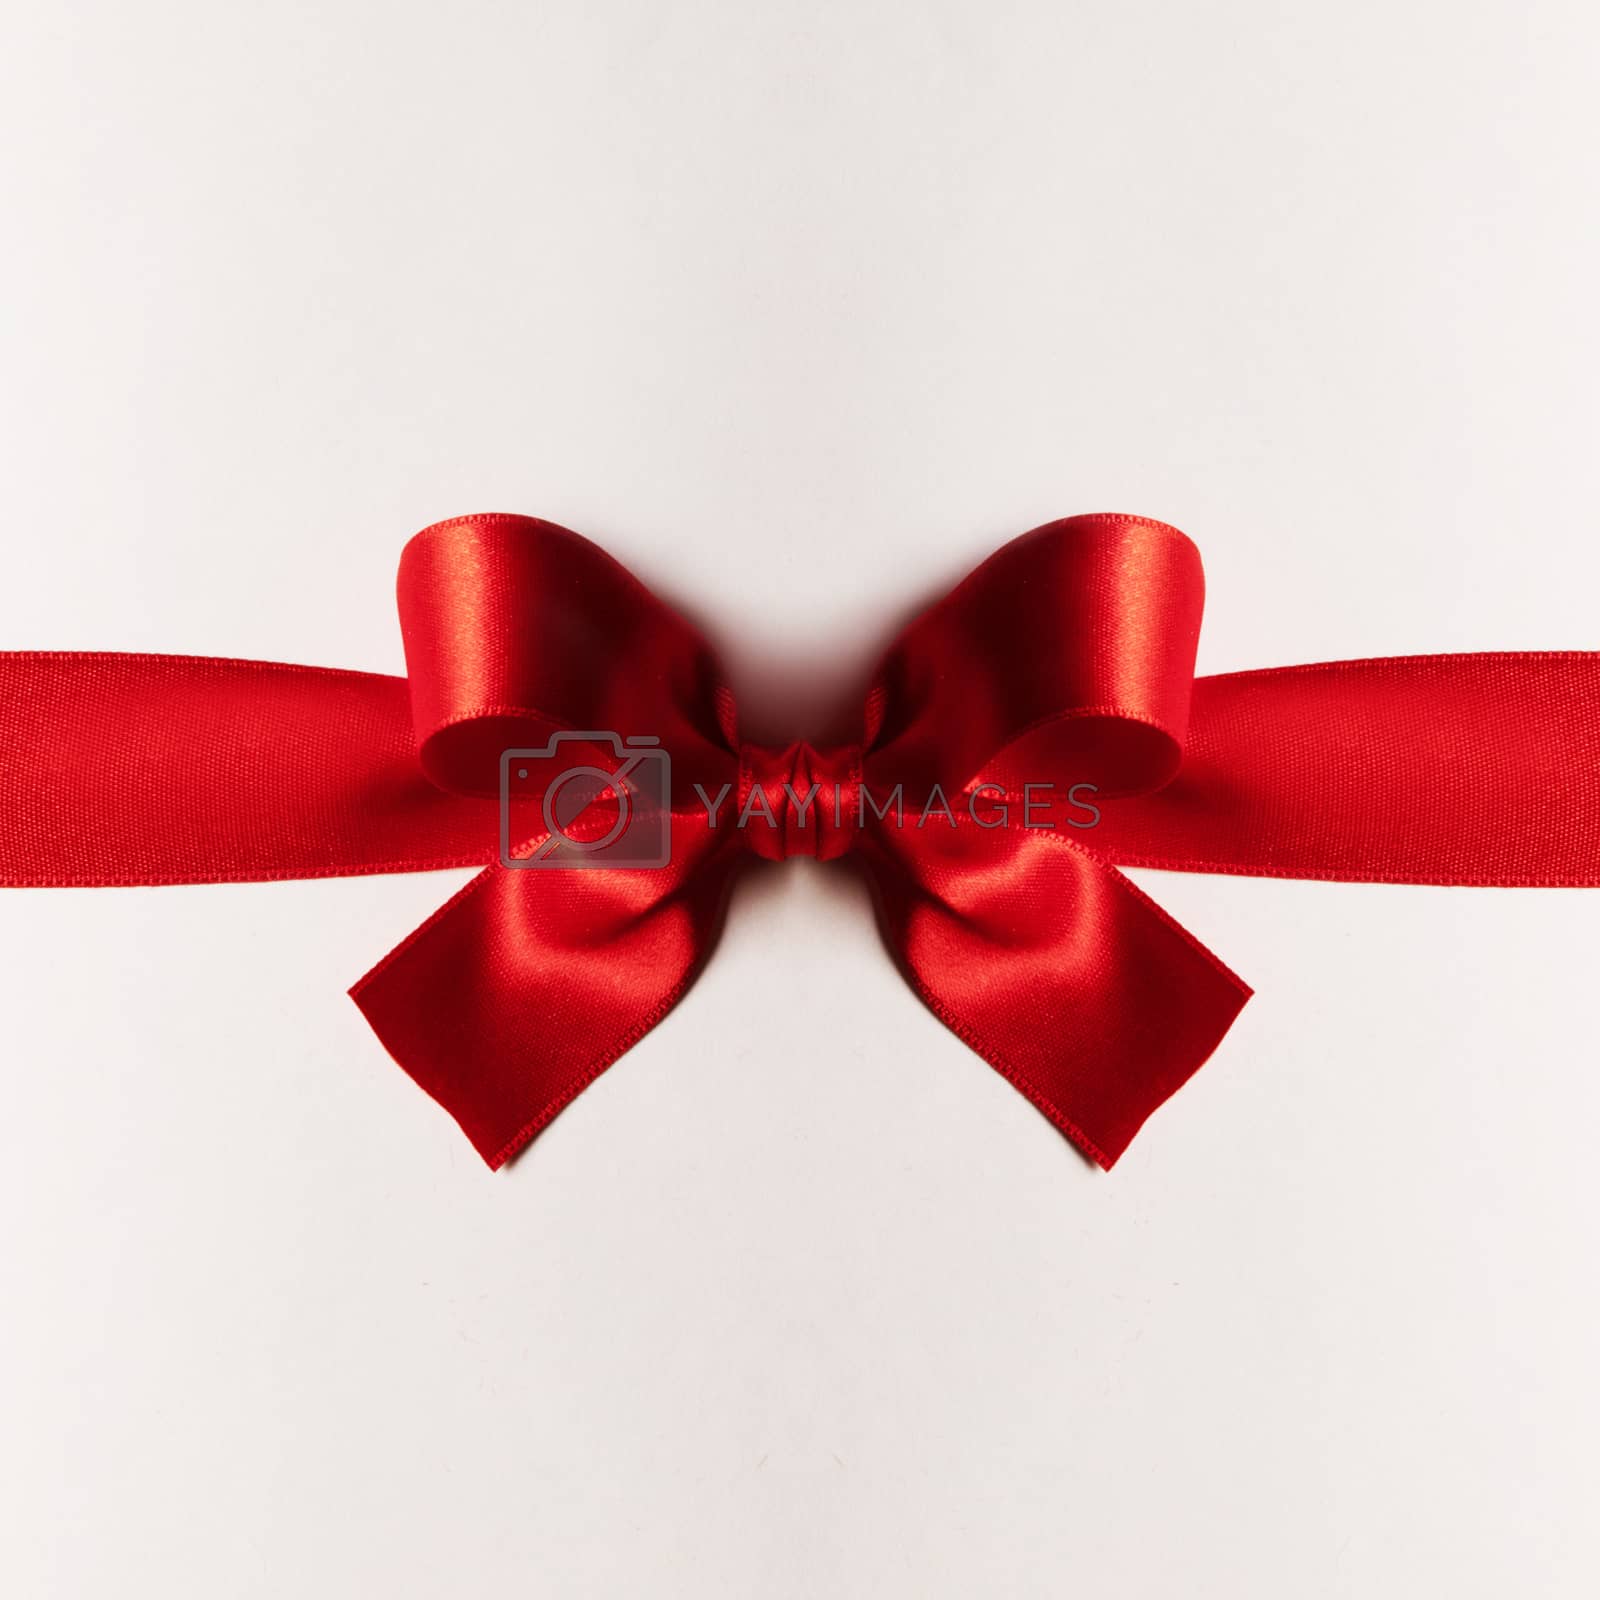 Royalty free image of Red gift bow on white by Yellowj